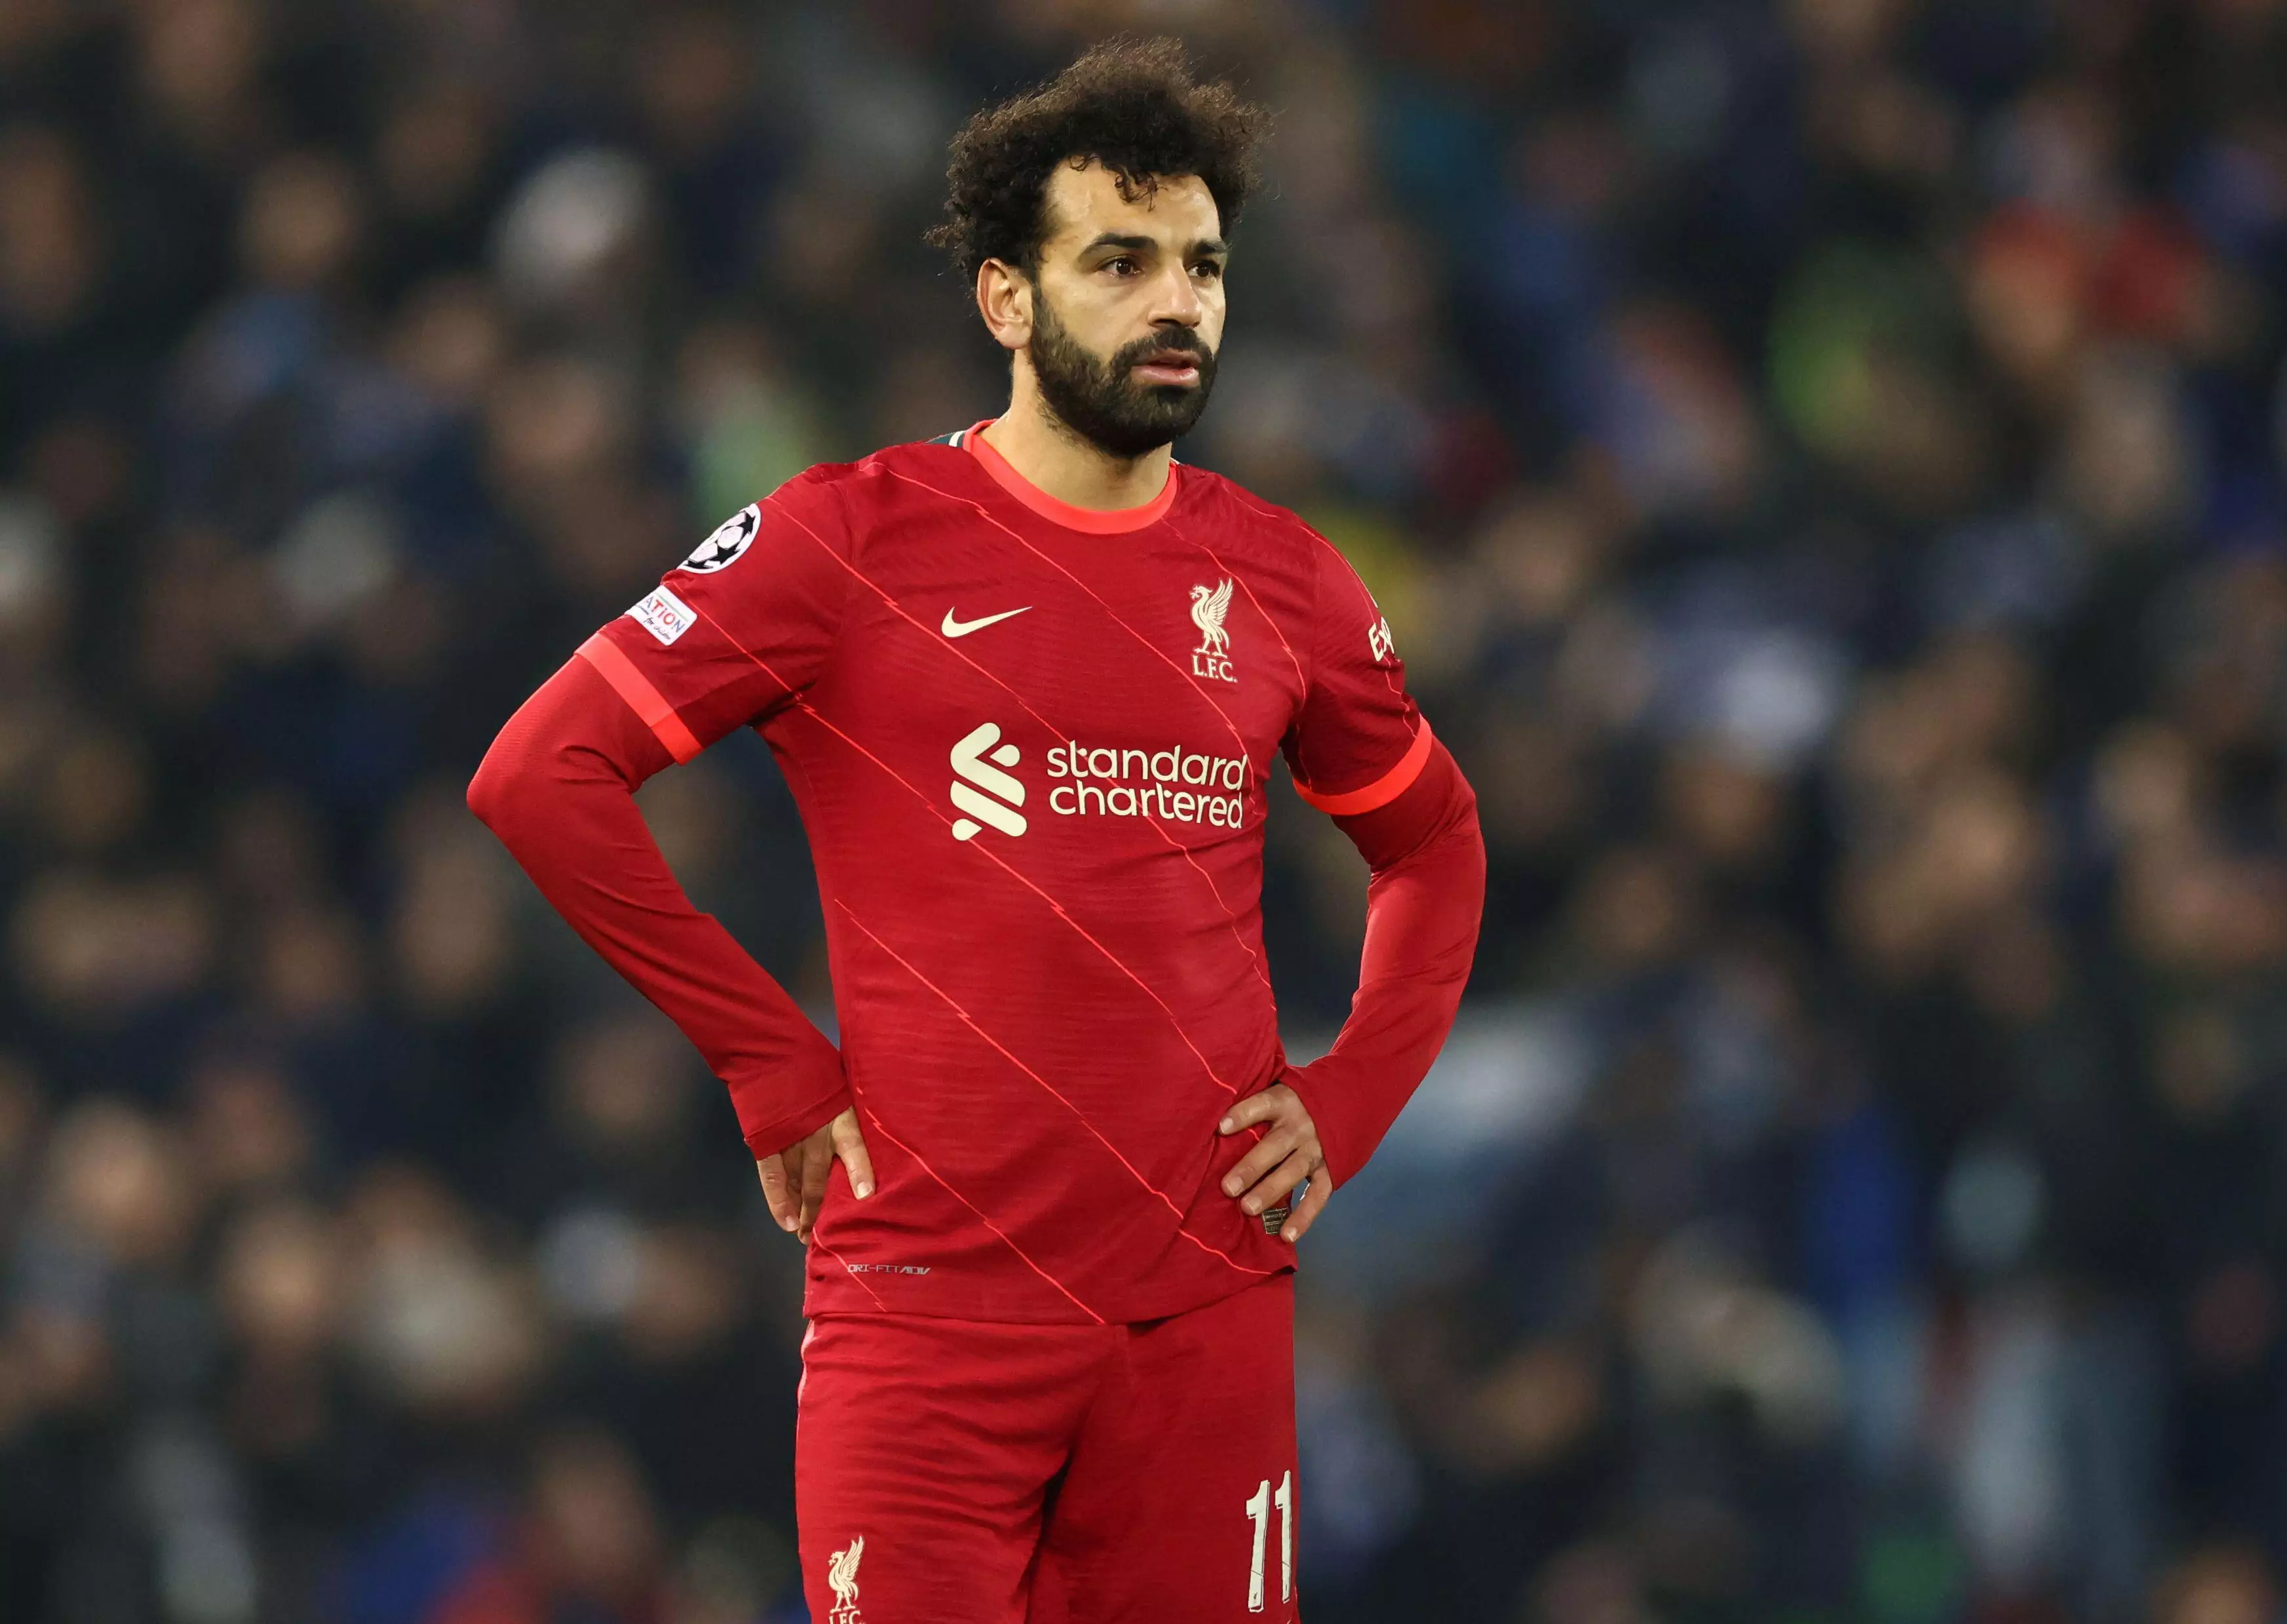 Salah is out of contract at Liverpool in the summer of 2023 (Image: PA)